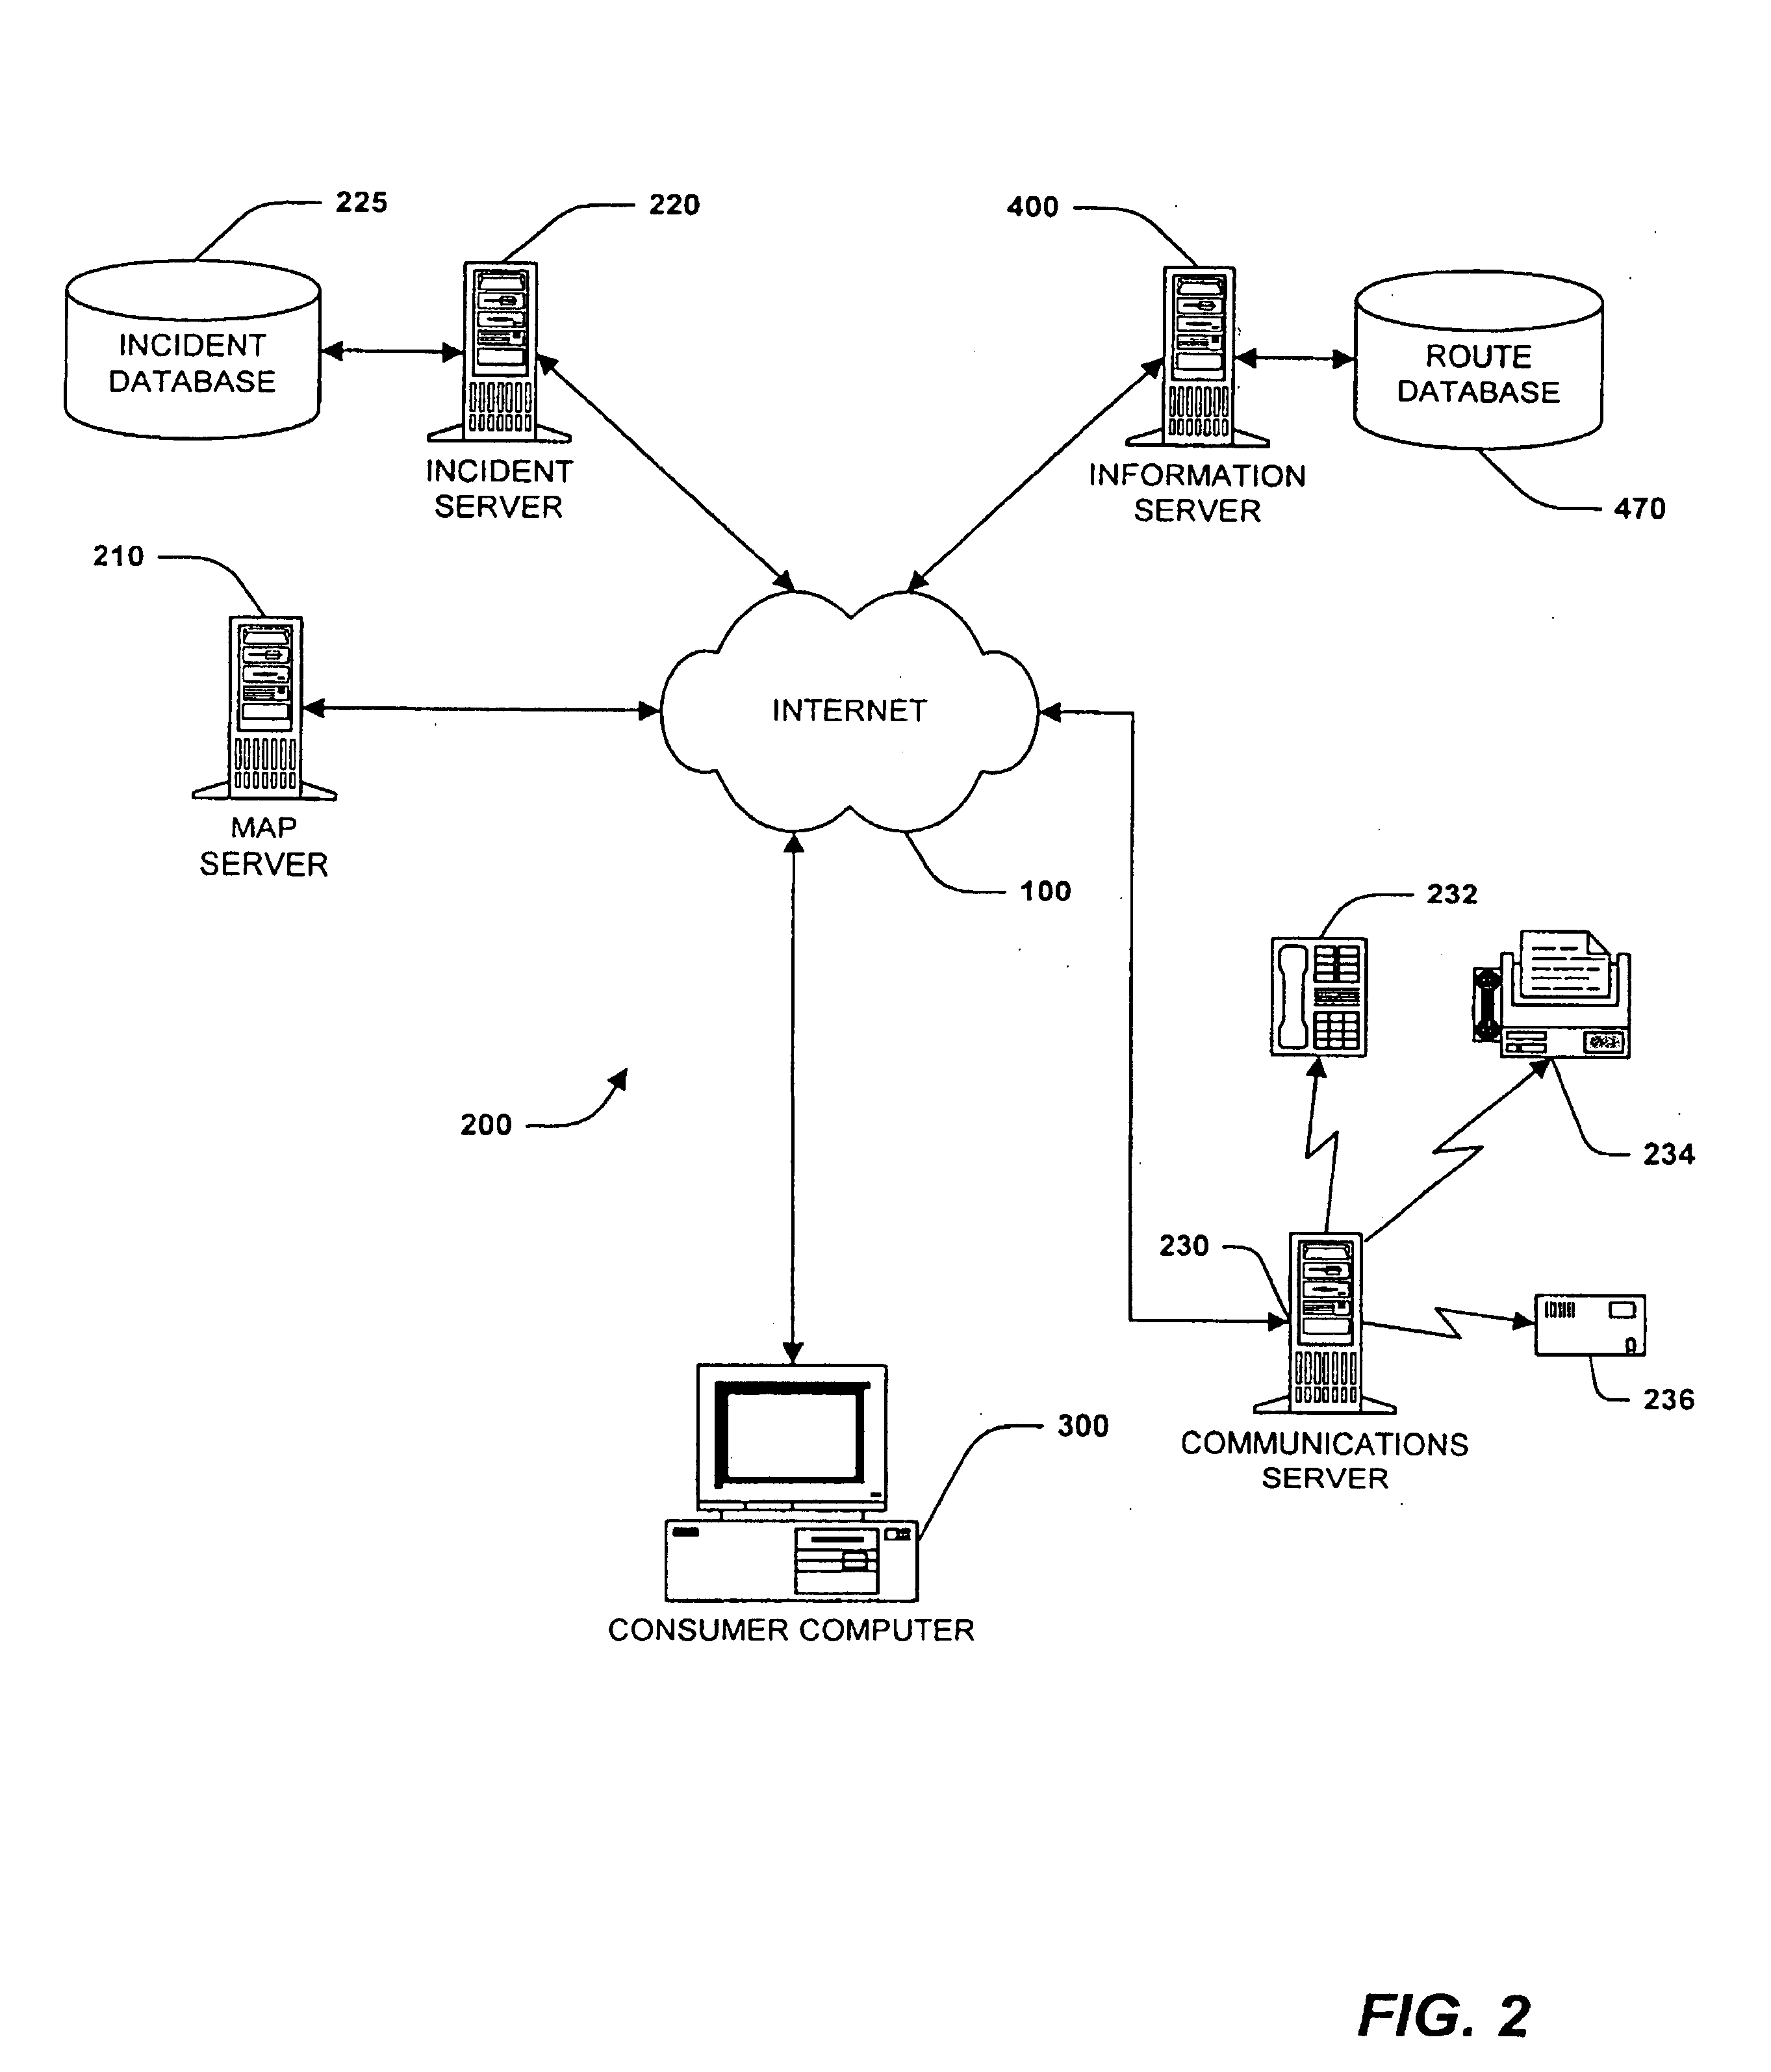 Method and system for matching an incident to a route